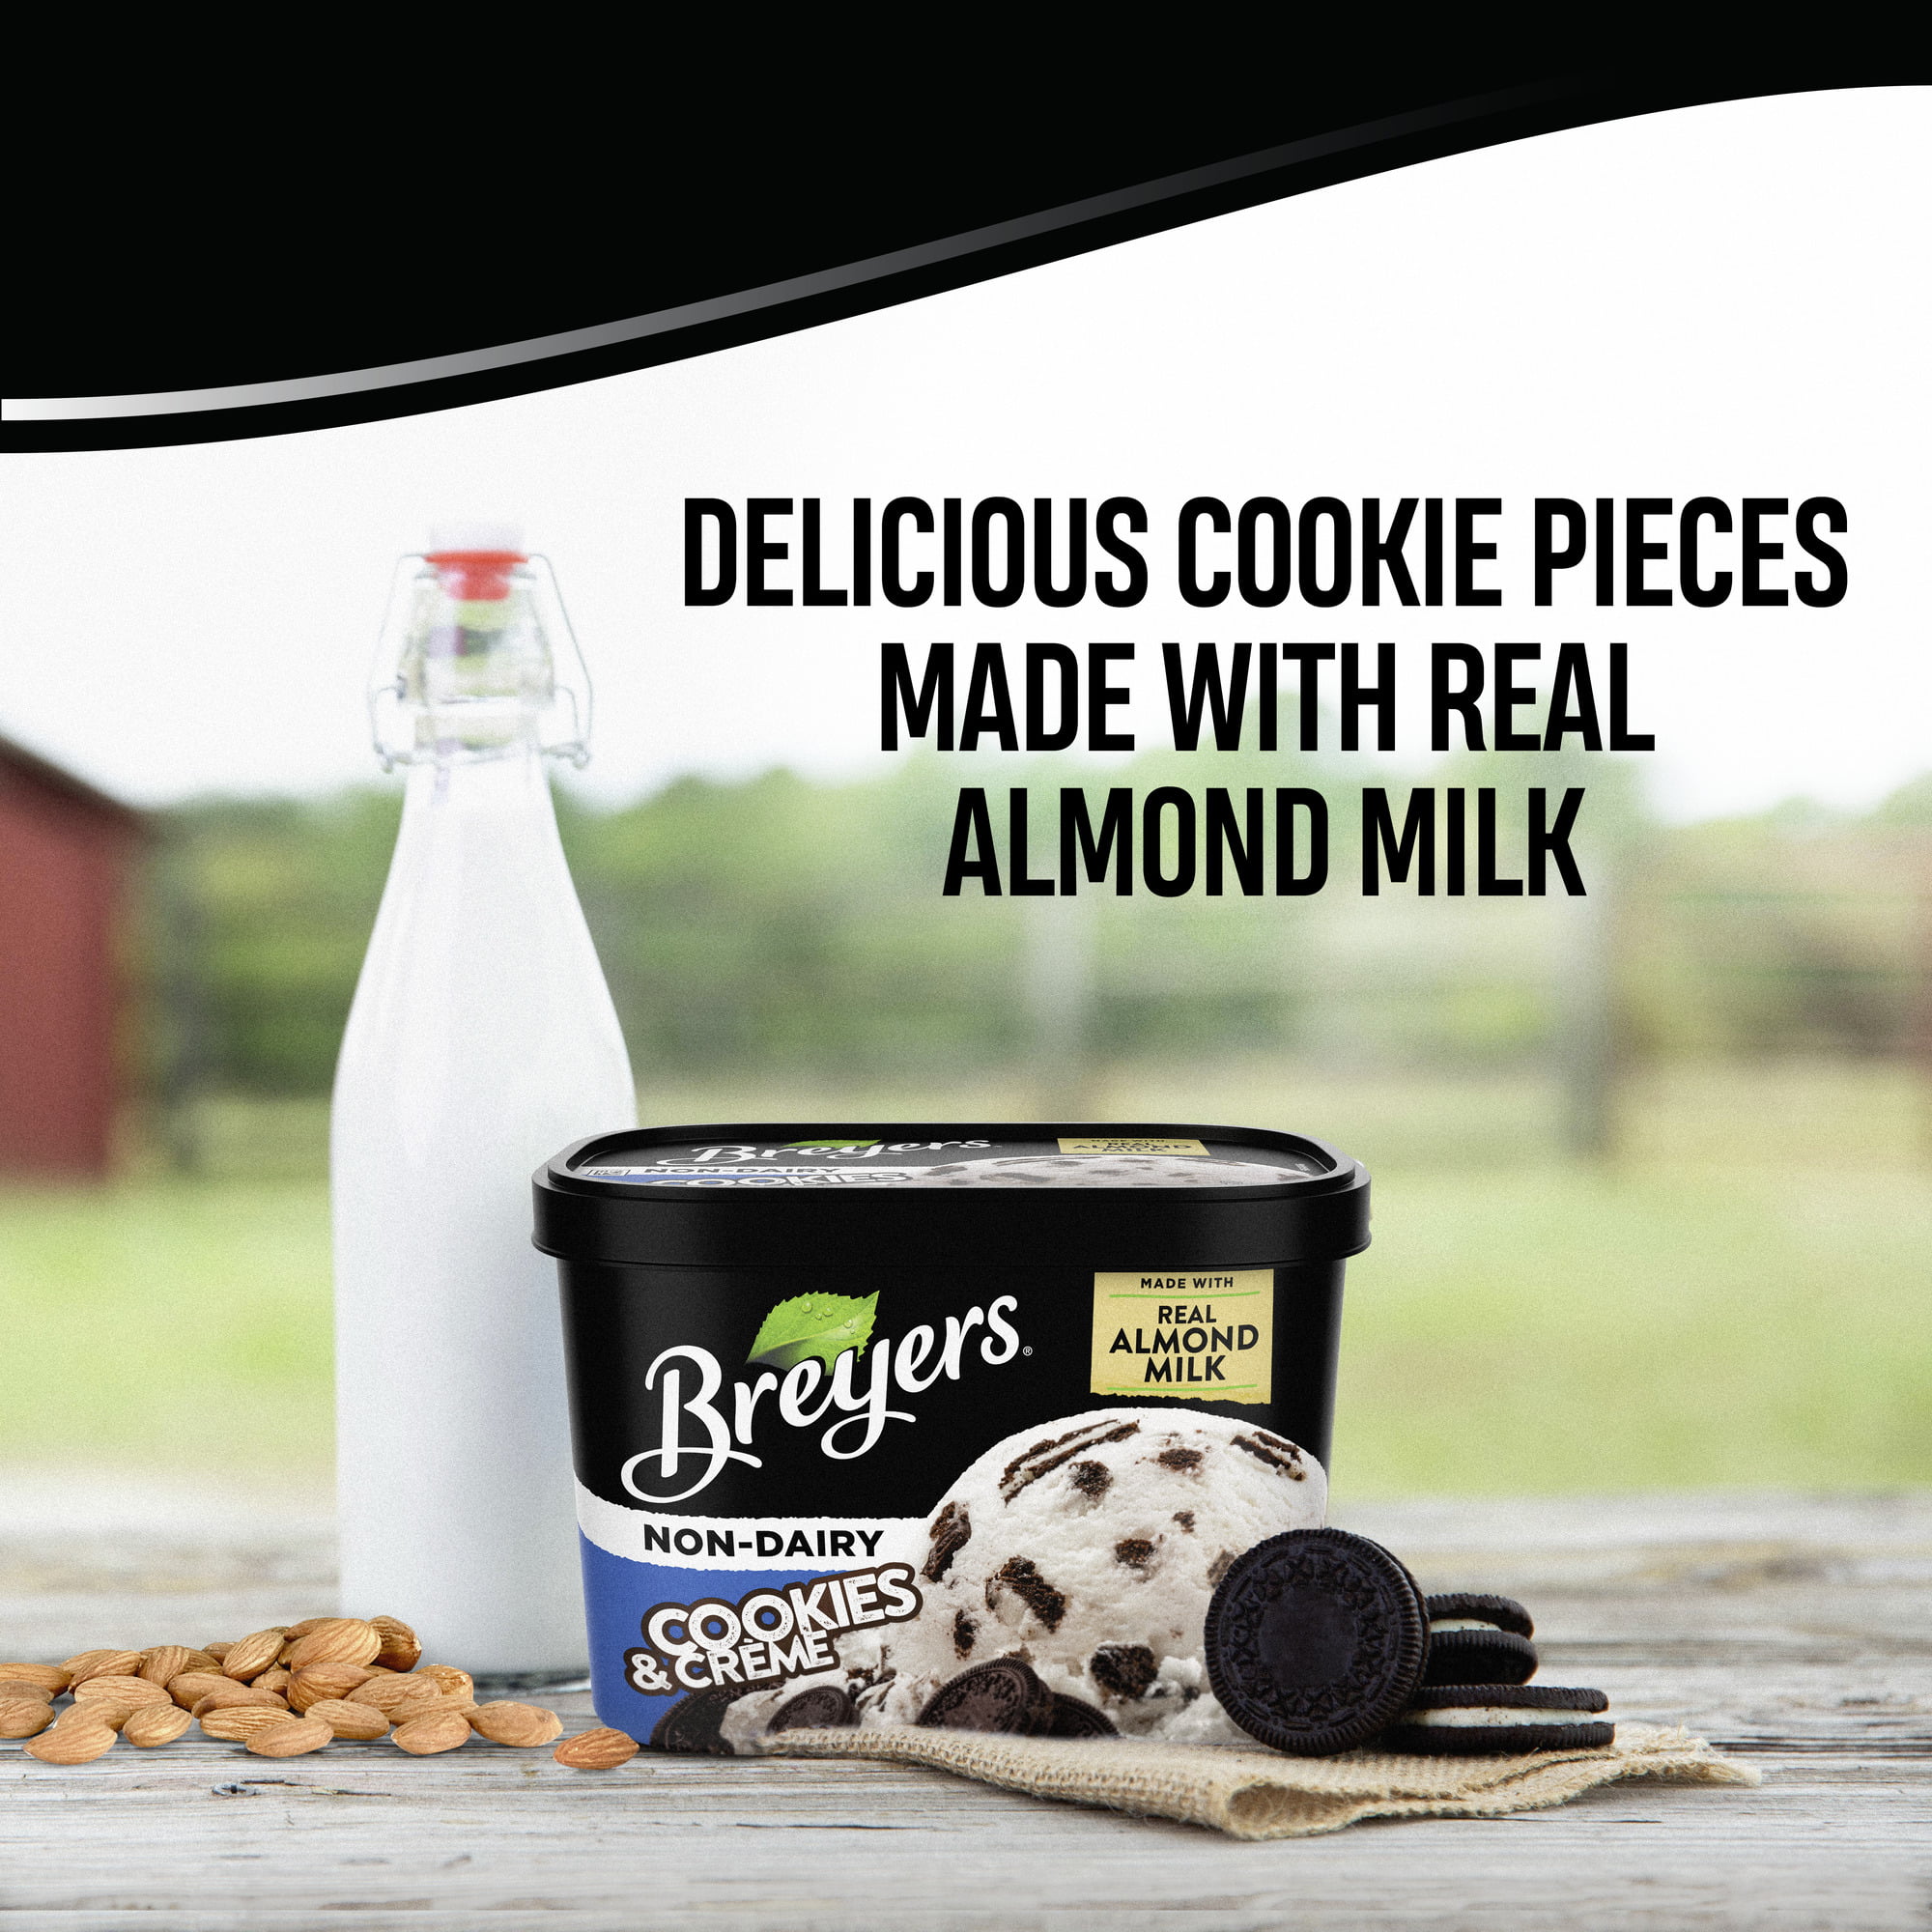 Breyers Non-Dairy Cookies and Creme Frozen Dessert, 48 oz - image 6 of 9